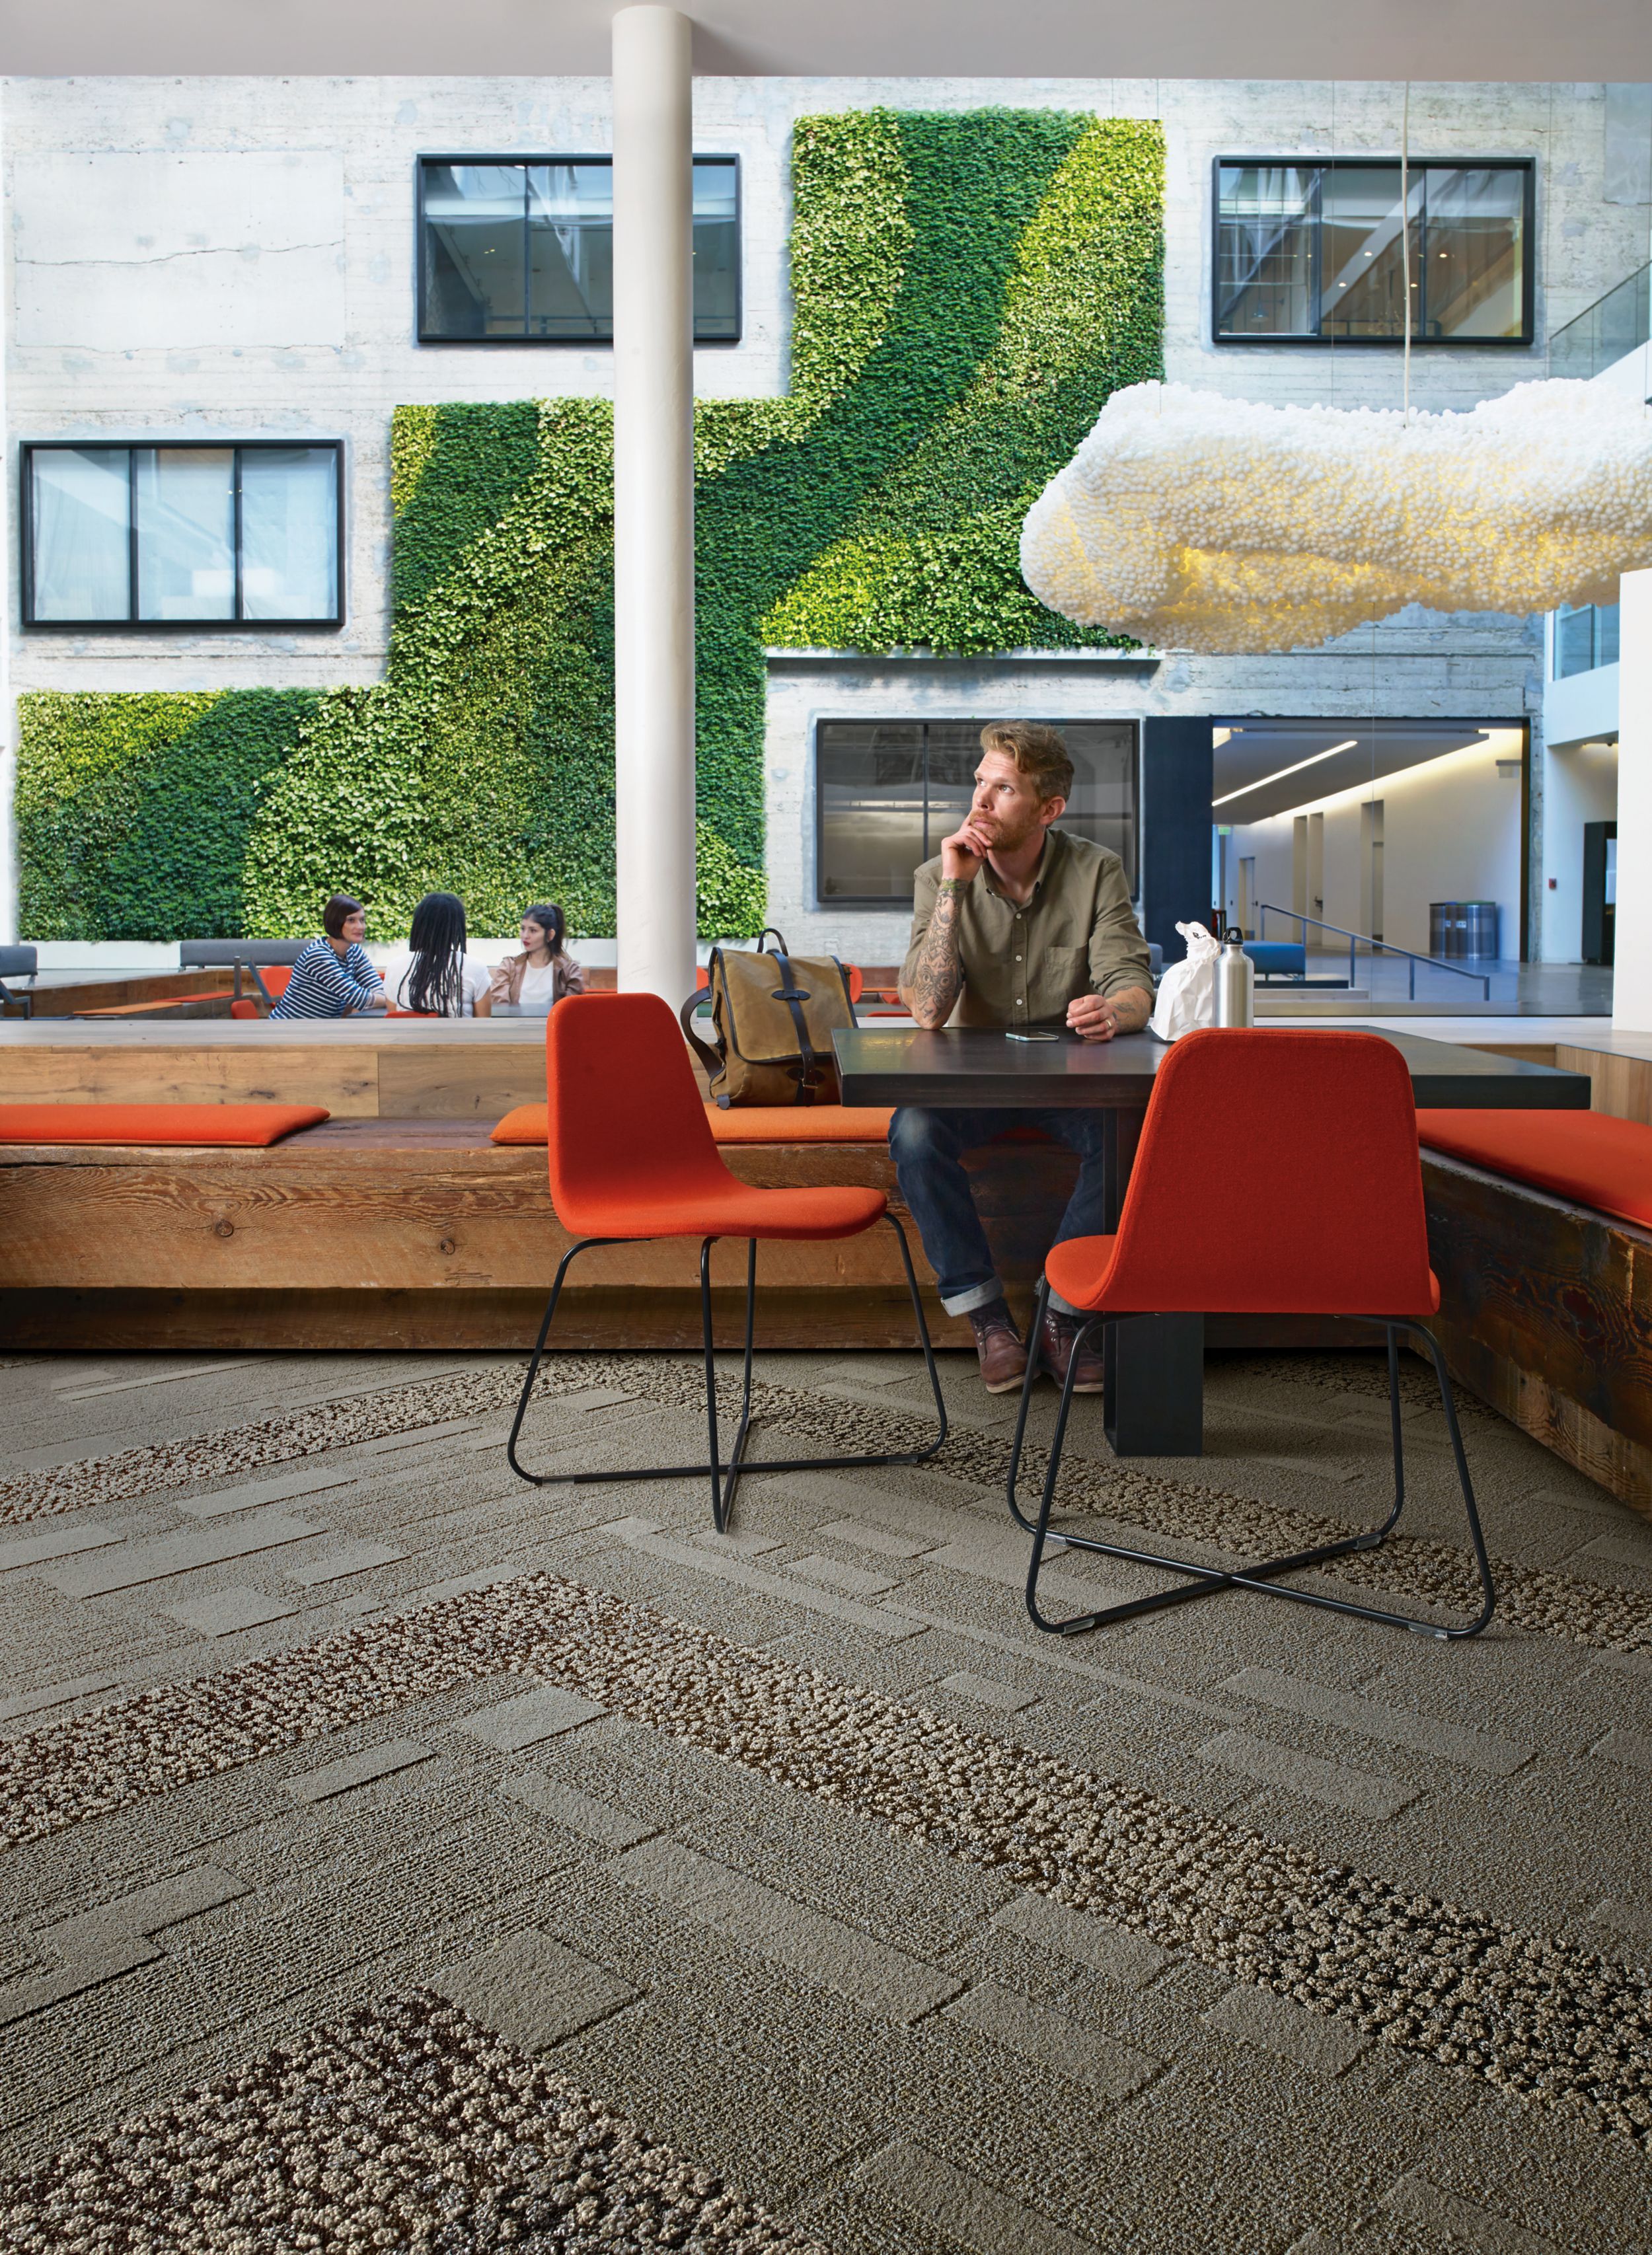 Interface EM552 plank carpet tile with man sitting at table with lunch and group meeting in front of vine wall in the background  afbeeldingnummer 3